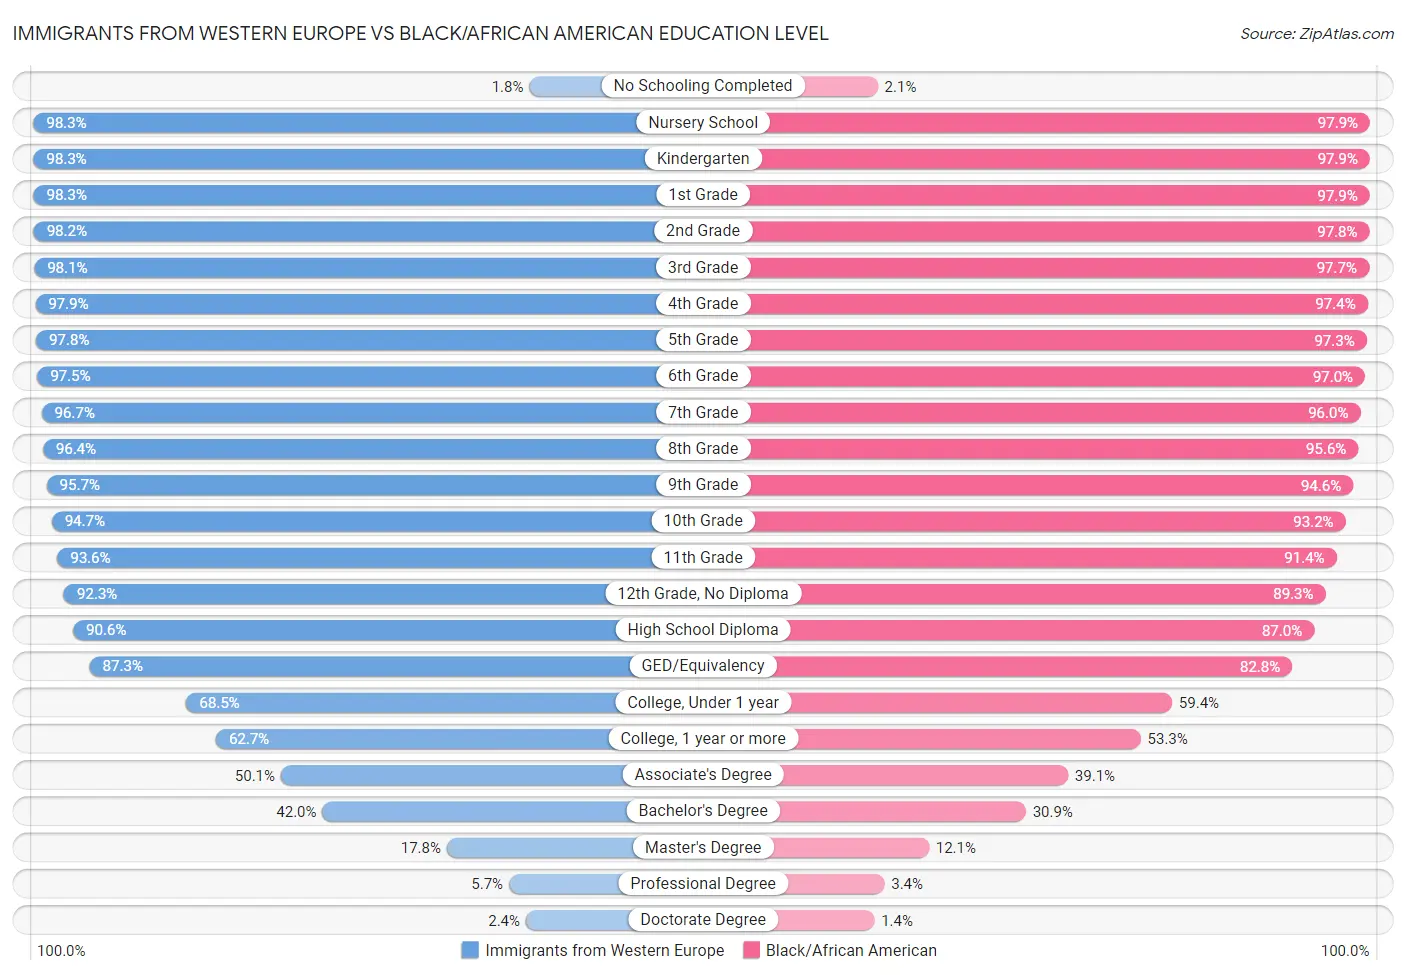 Immigrants from Western Europe vs Black/African American Education Level